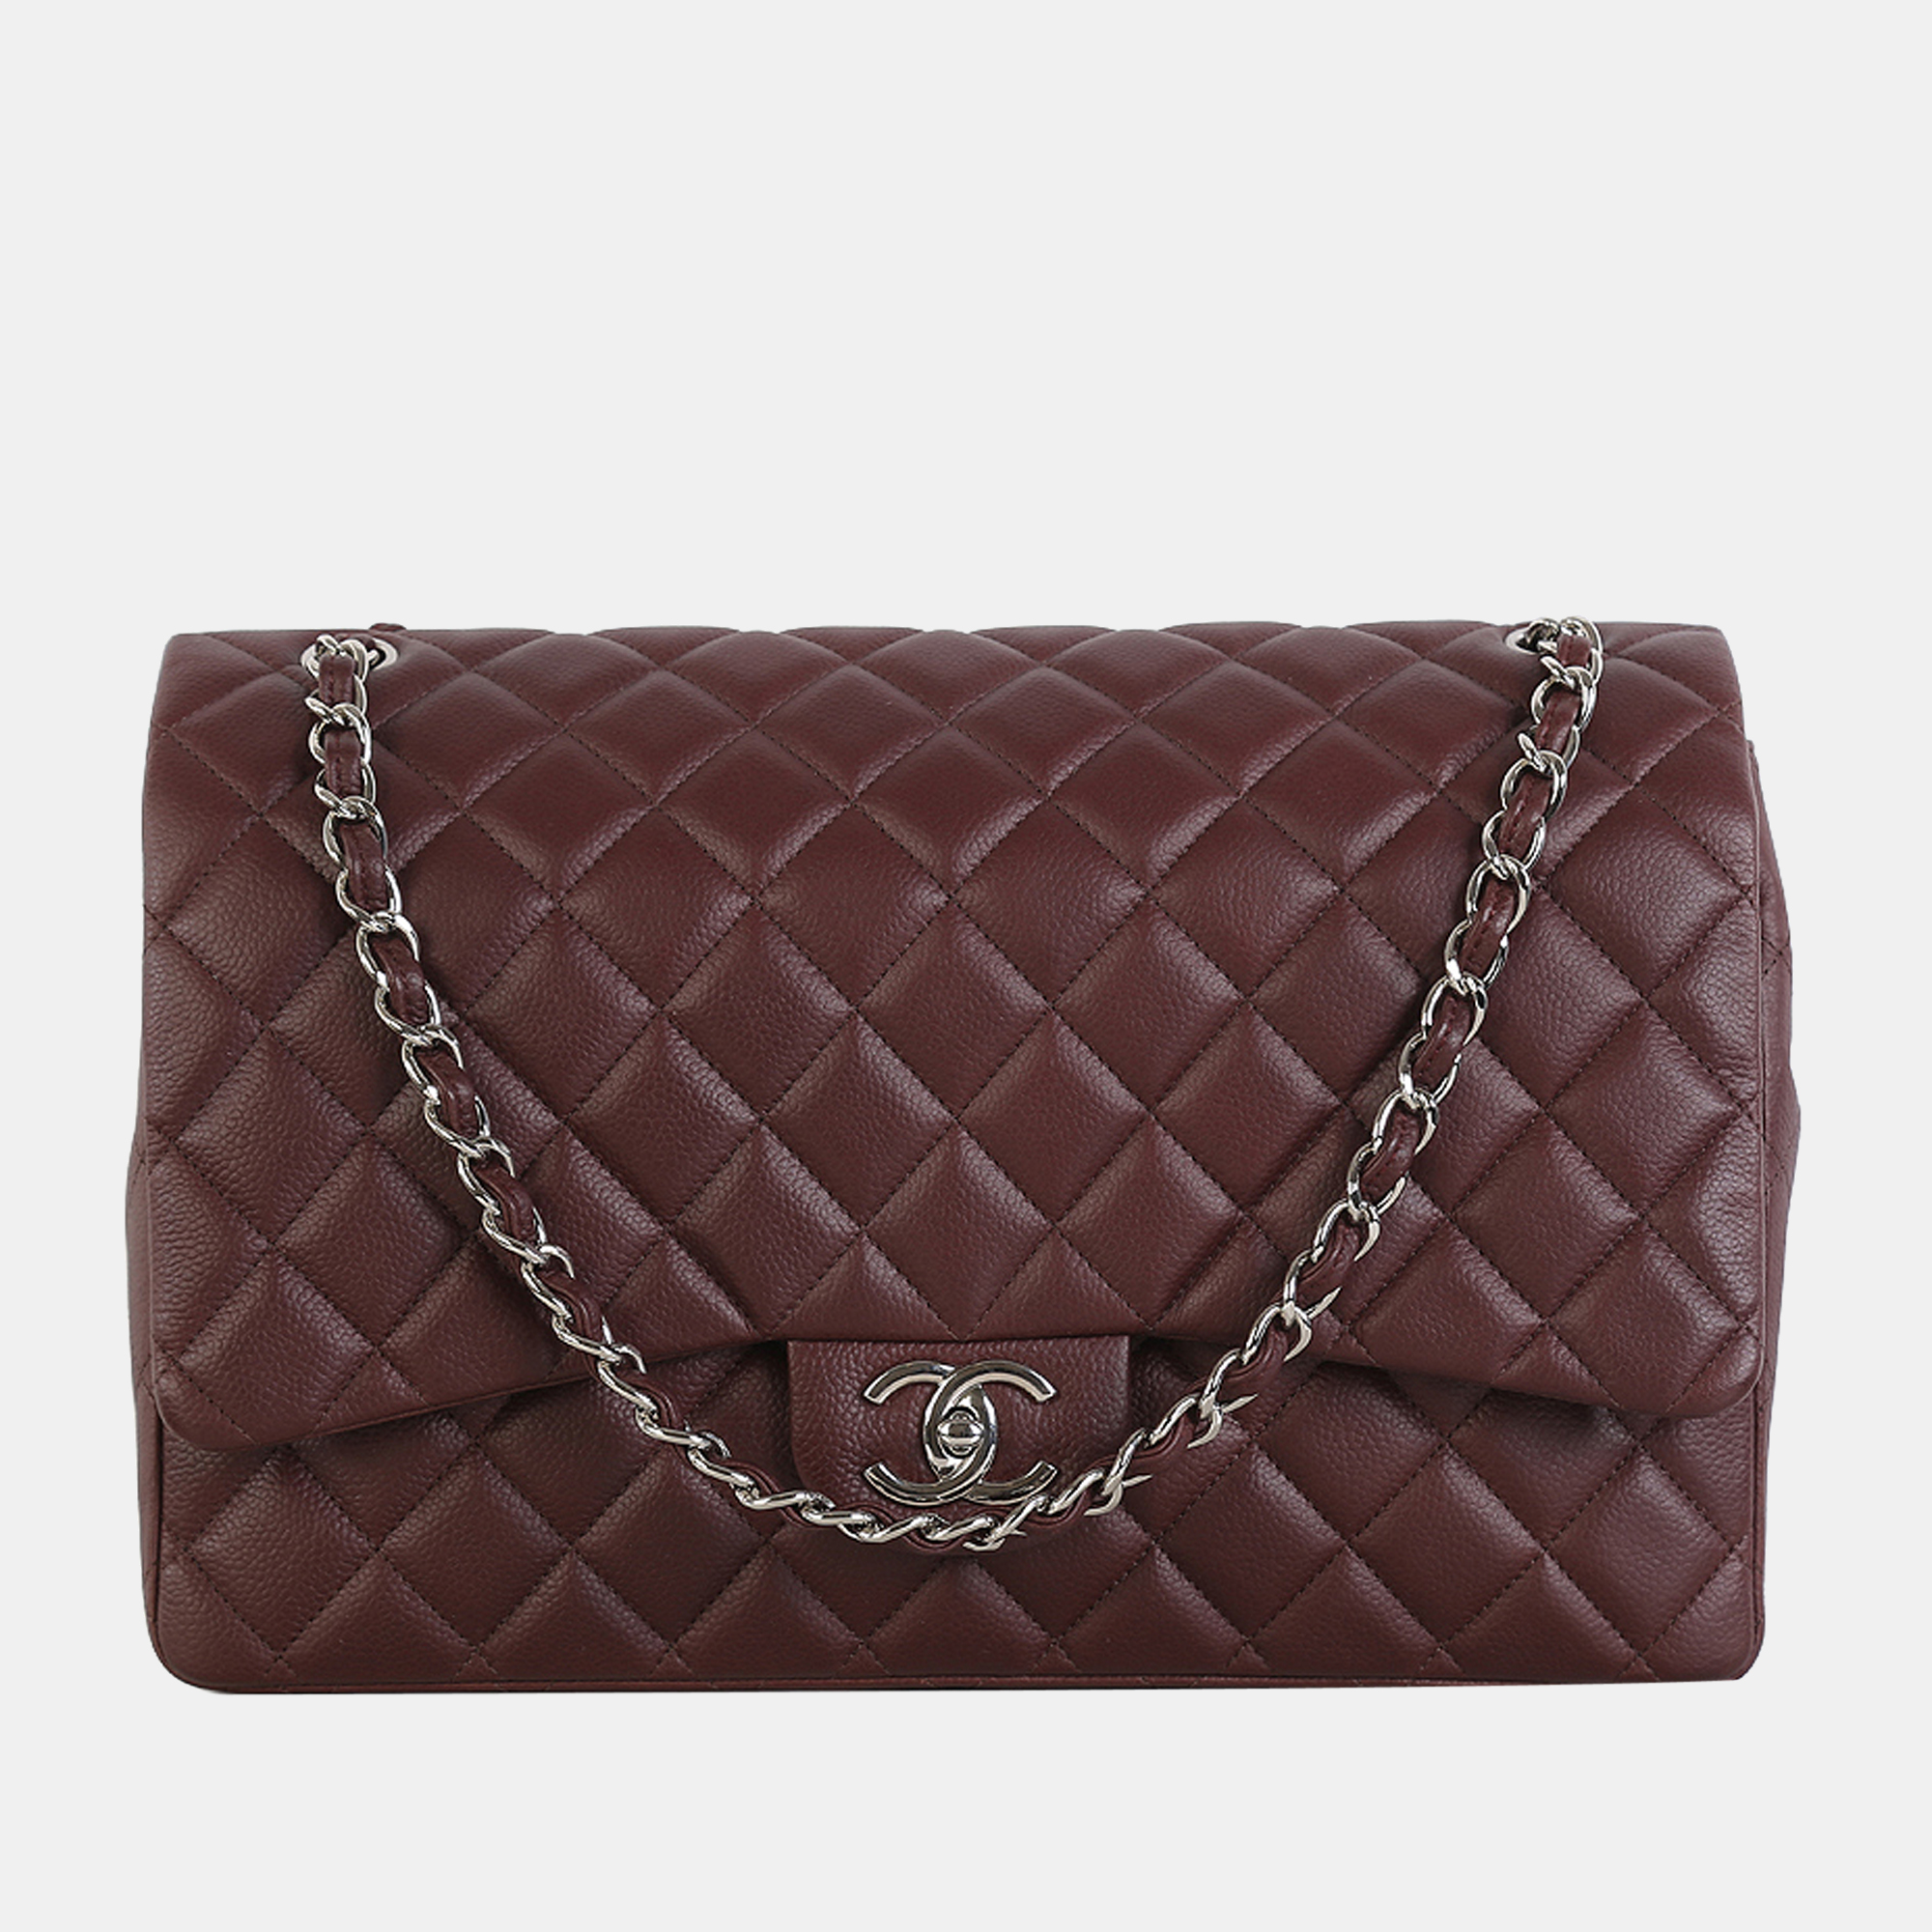 Pre-owned Chanel Burnt Brown Quilted Caviar Leather Maxi Shoulder Bag